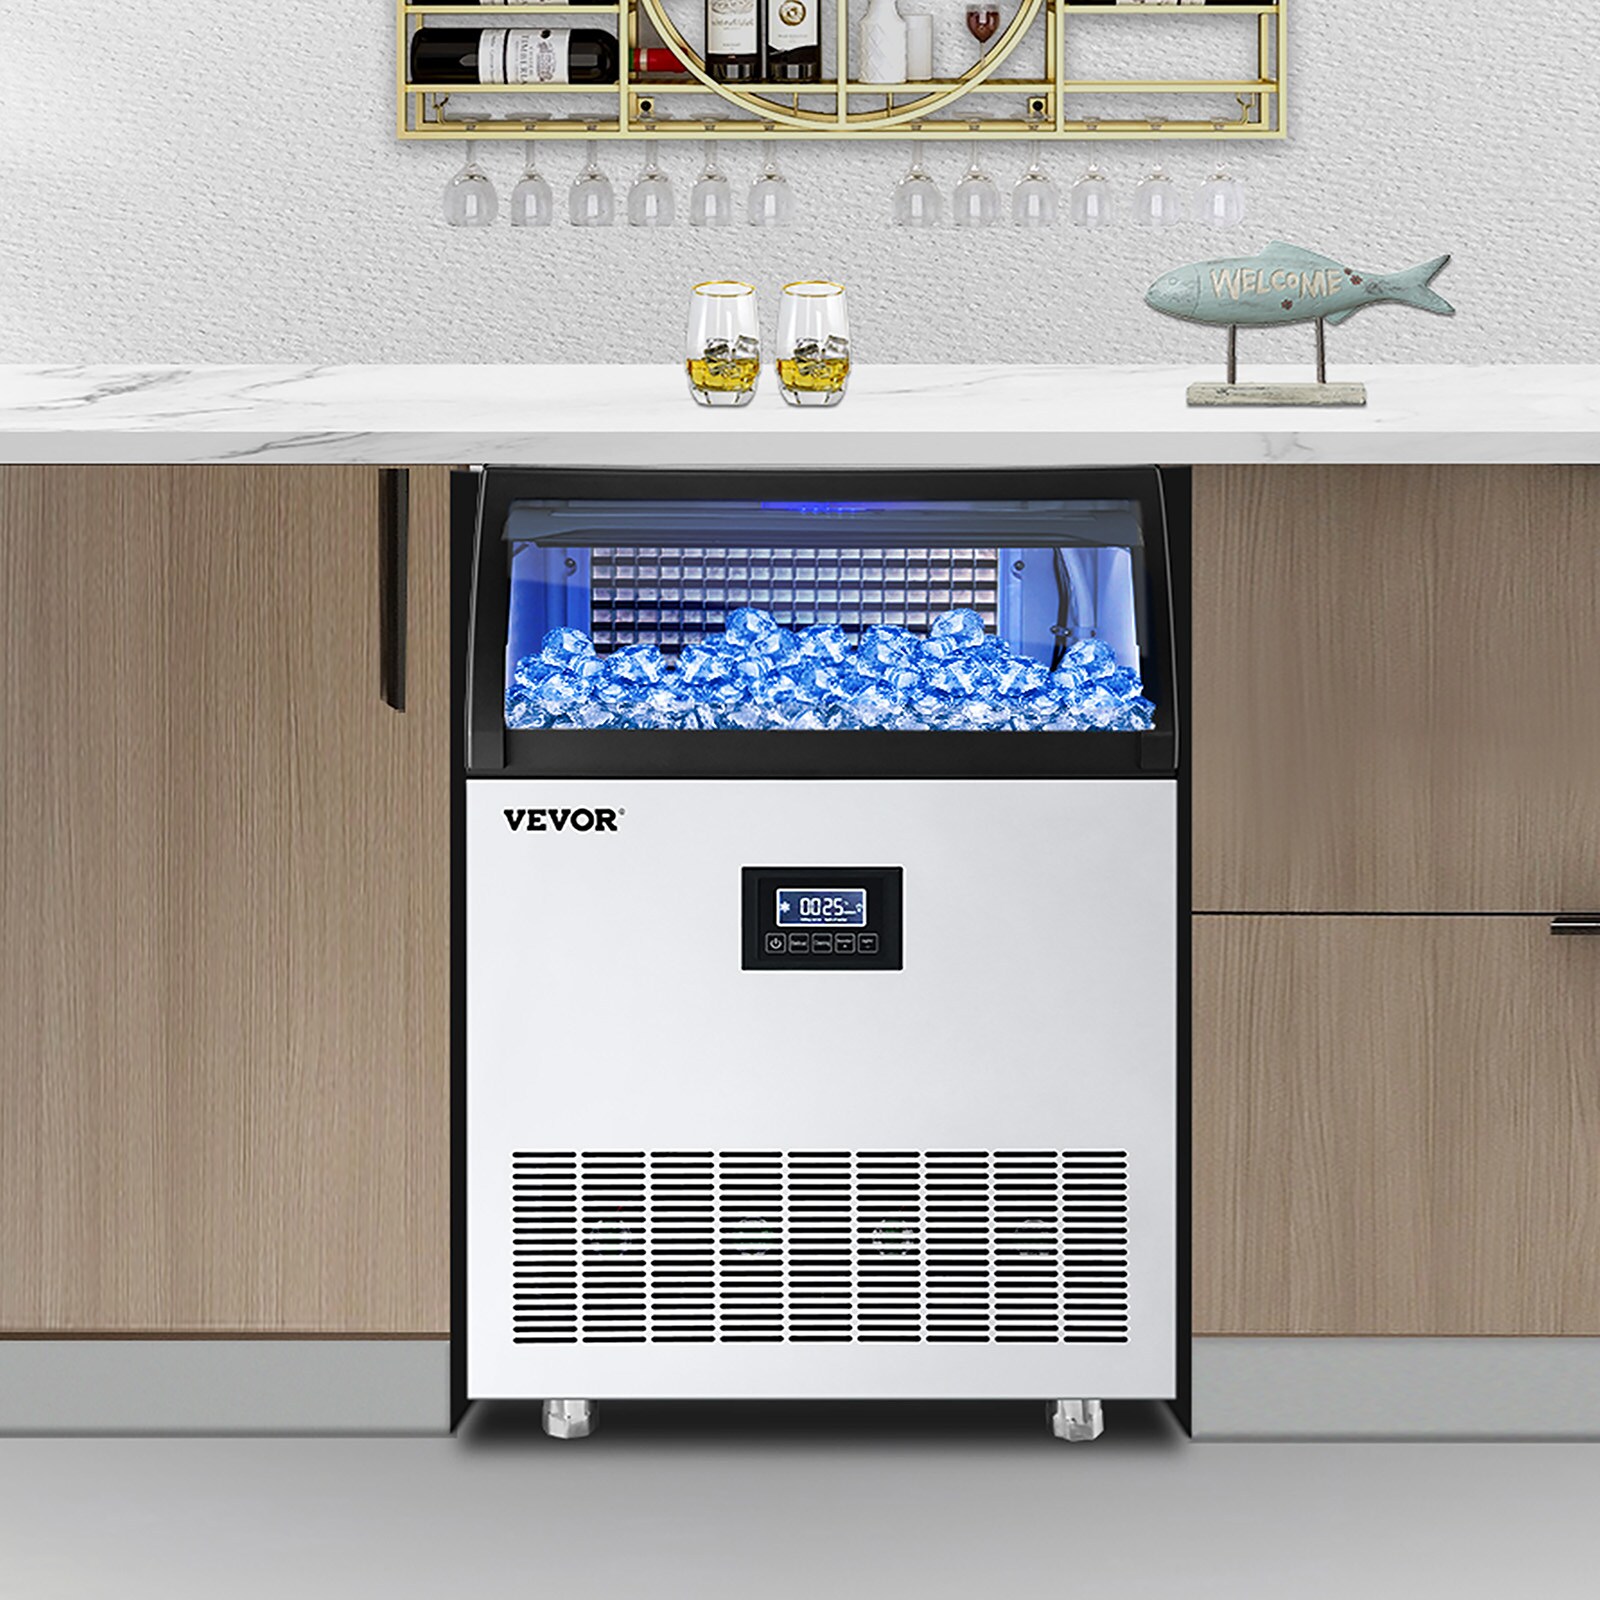 VEVOR 110V Commercial Ice Maker Machine 155LBS/24H, 530W Stainless Steel  Ice Machine with 33LBS Storage Capacity, 72 Ice Cubes Ready in 11-15Mins,  Includes Water Filter and Connection Hose